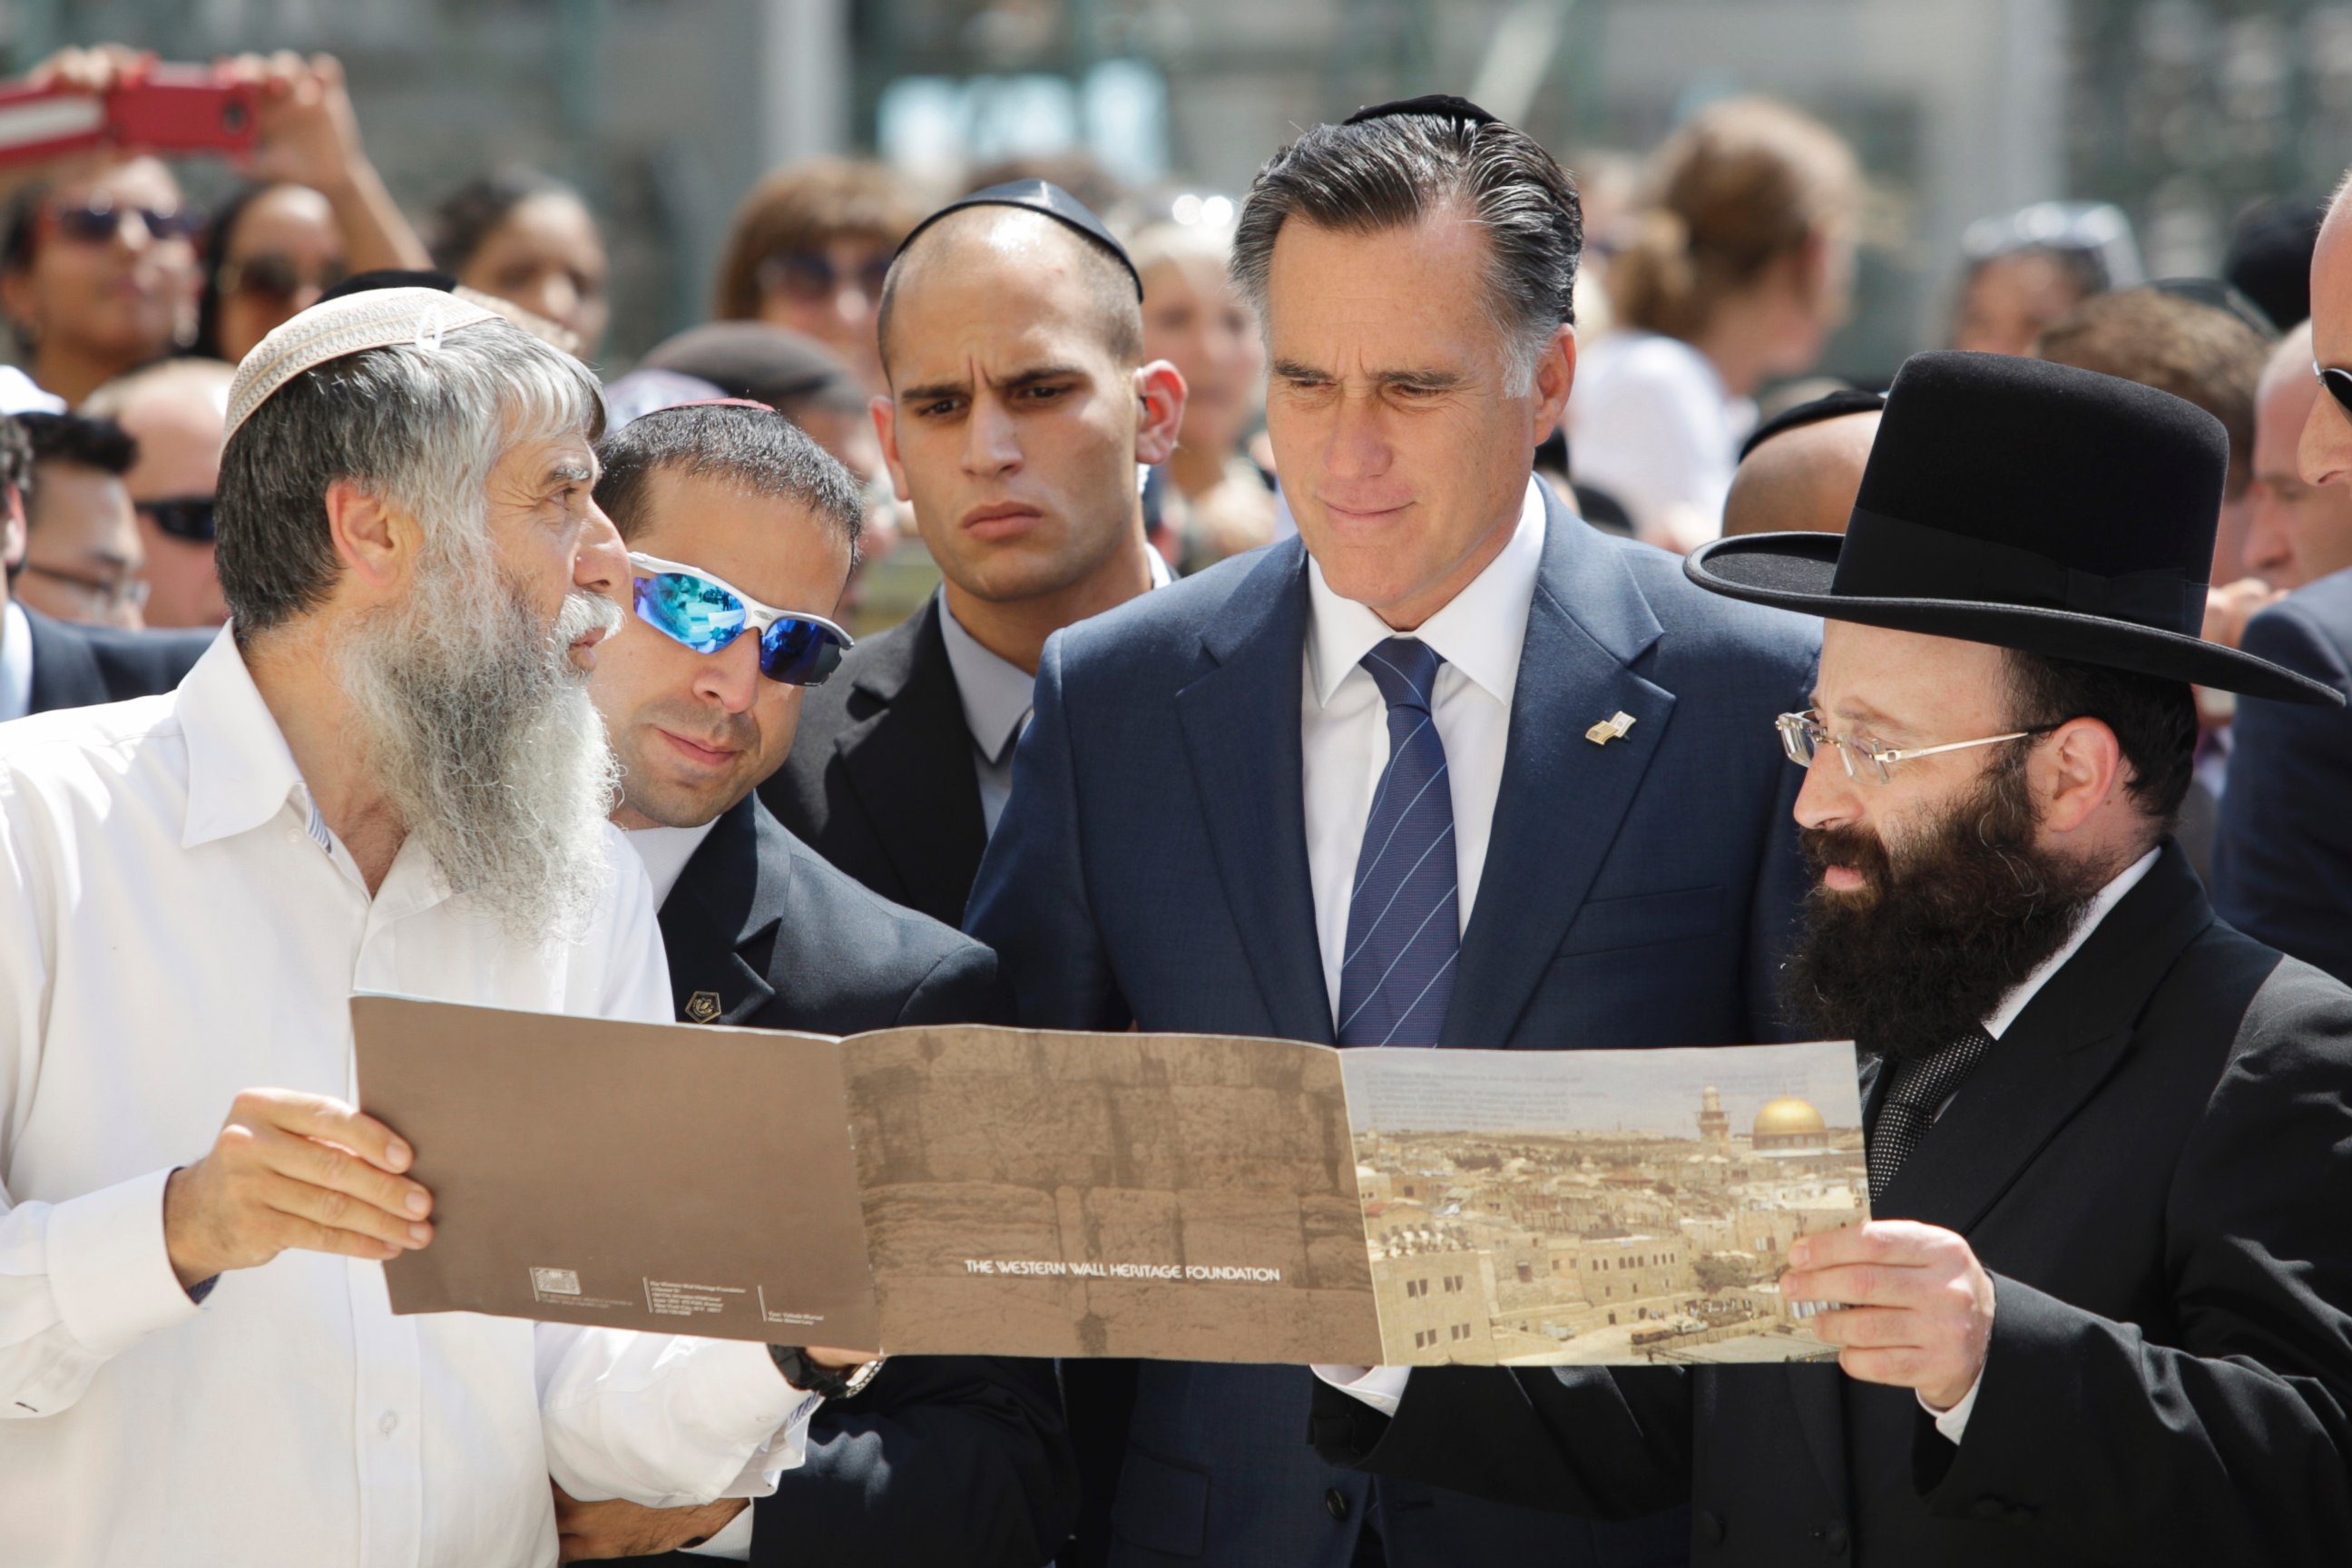 PHOTO: Republican presidential candidate and former Massachusetts Gov. Mitt Romney is presented with a booklet as he visits the Western Wall in Jerusalem, July 29, 2012. 